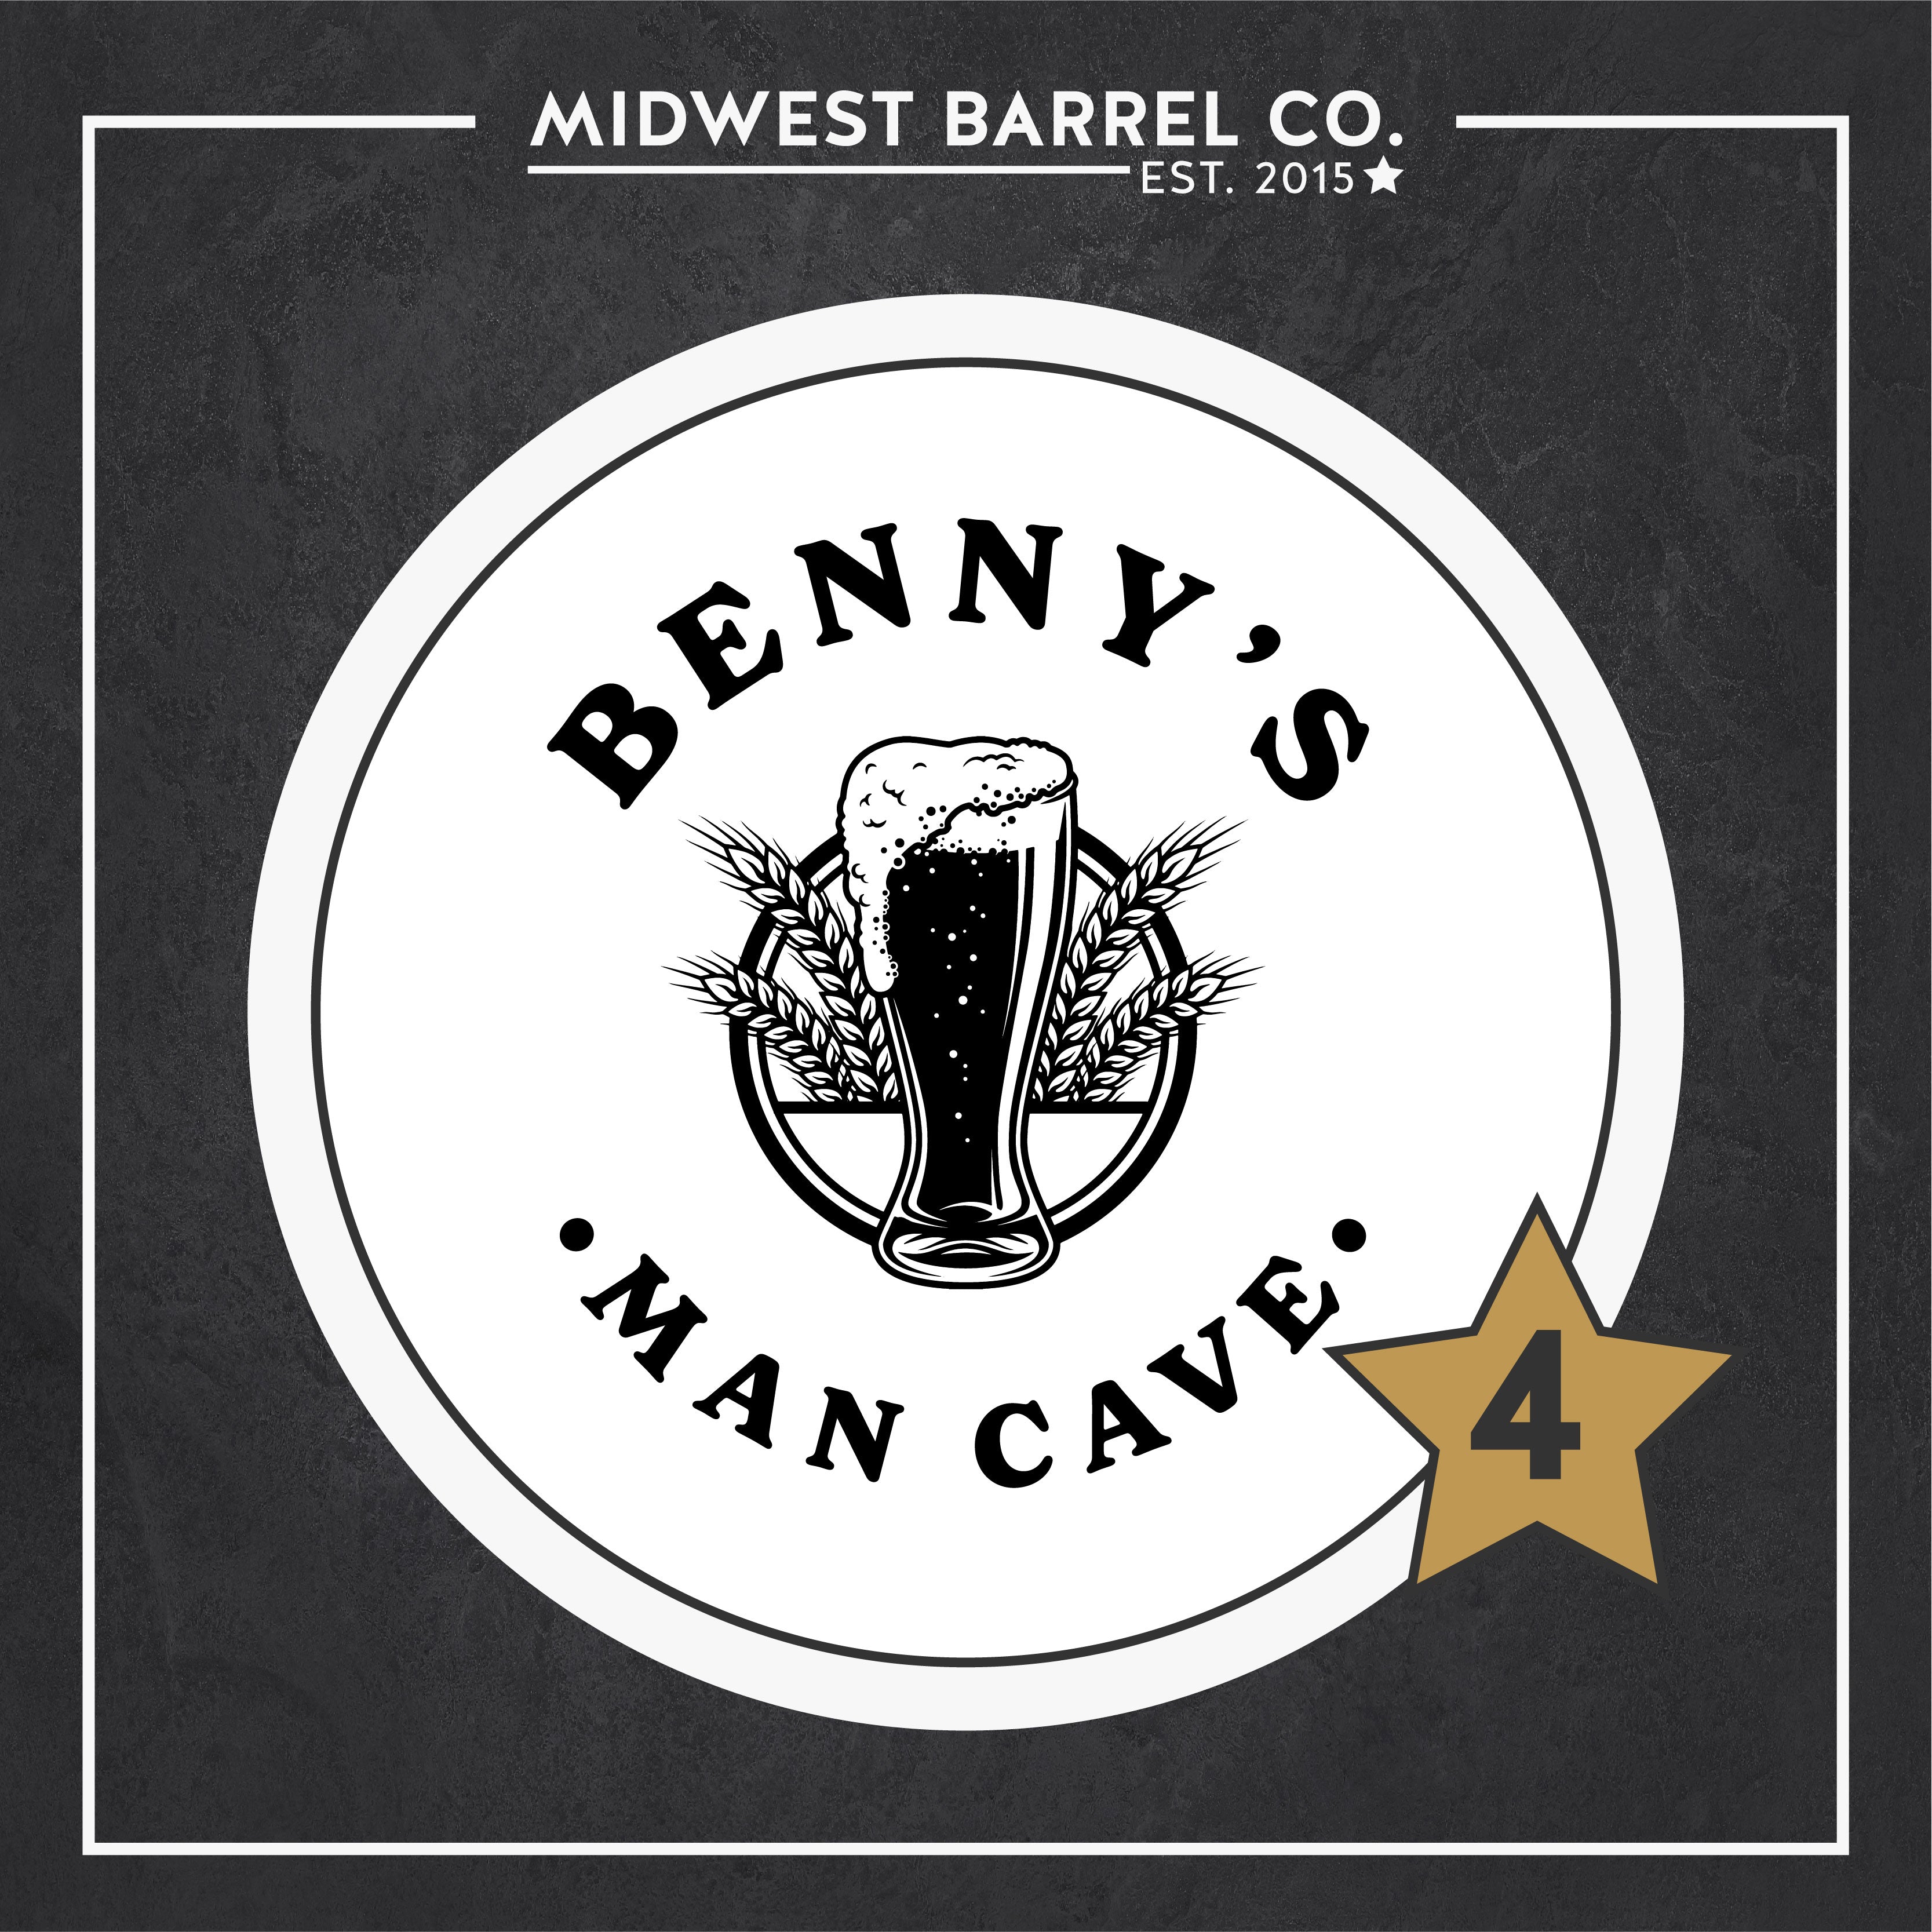 Option 4 design with tall beer glass overflowing with circle and barley behind it and text Benny's Man Cave around the image